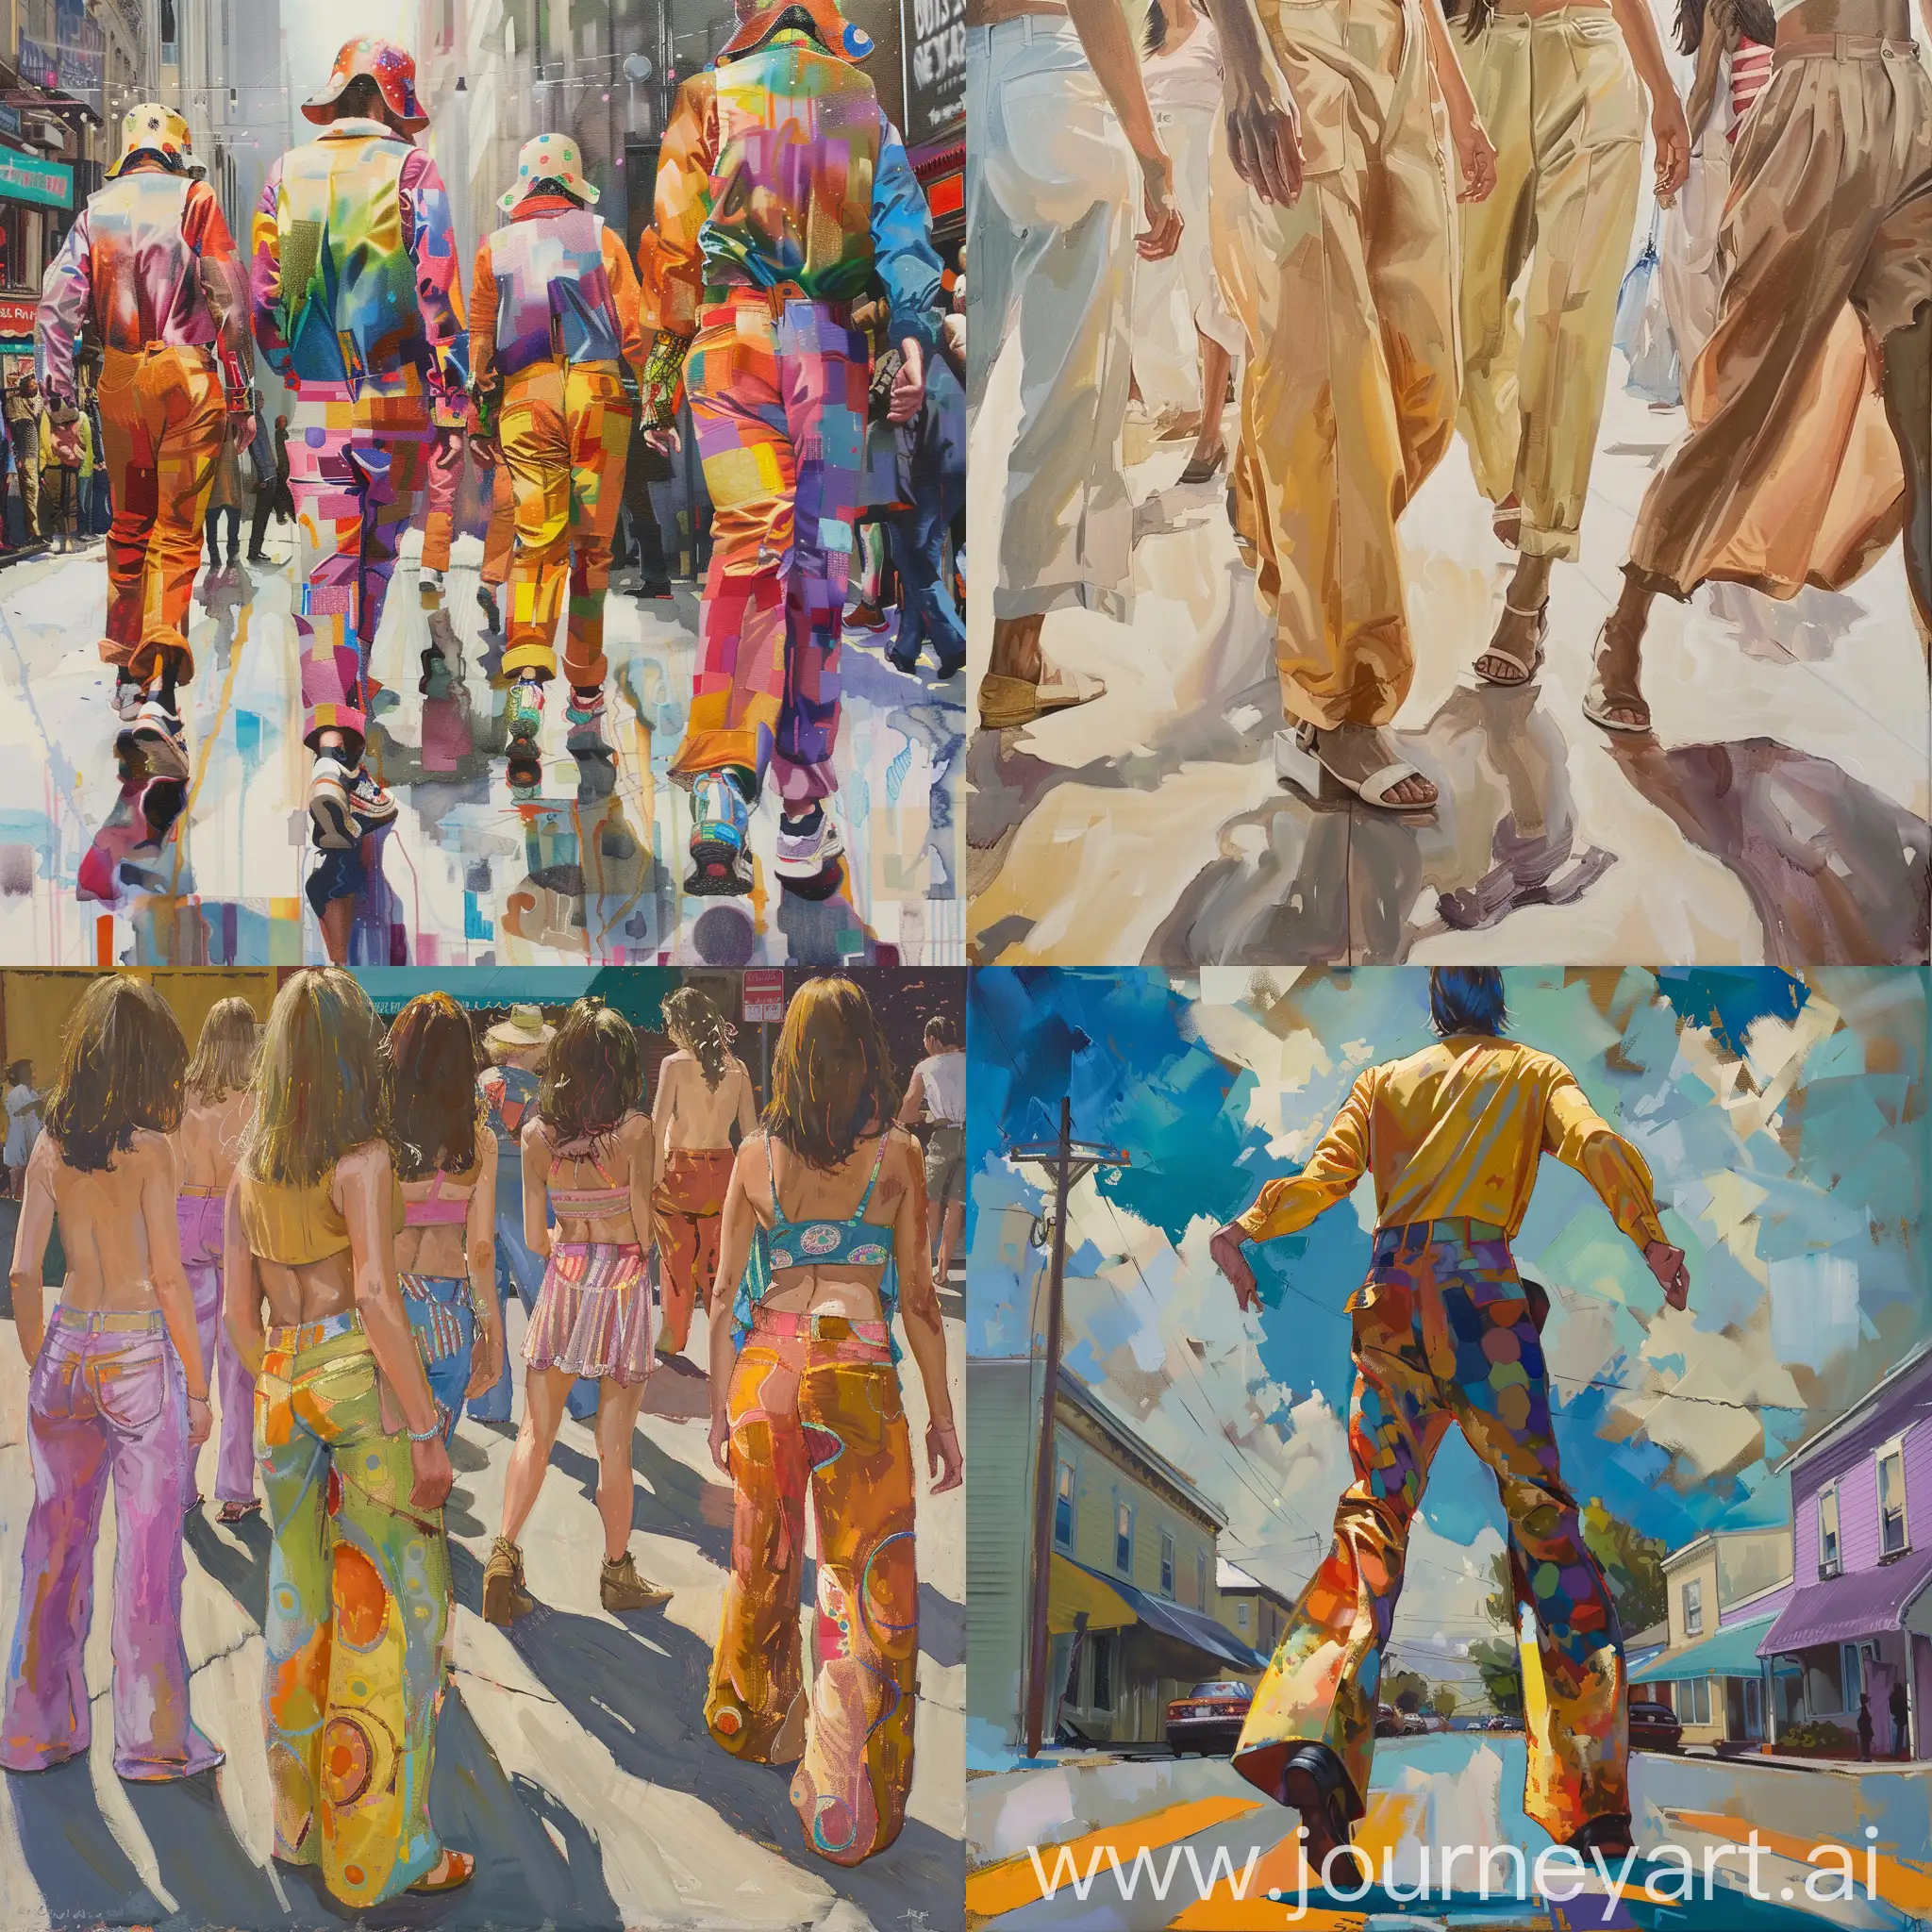 Colorful-Parade-Procession-with-Participants-in-Pants